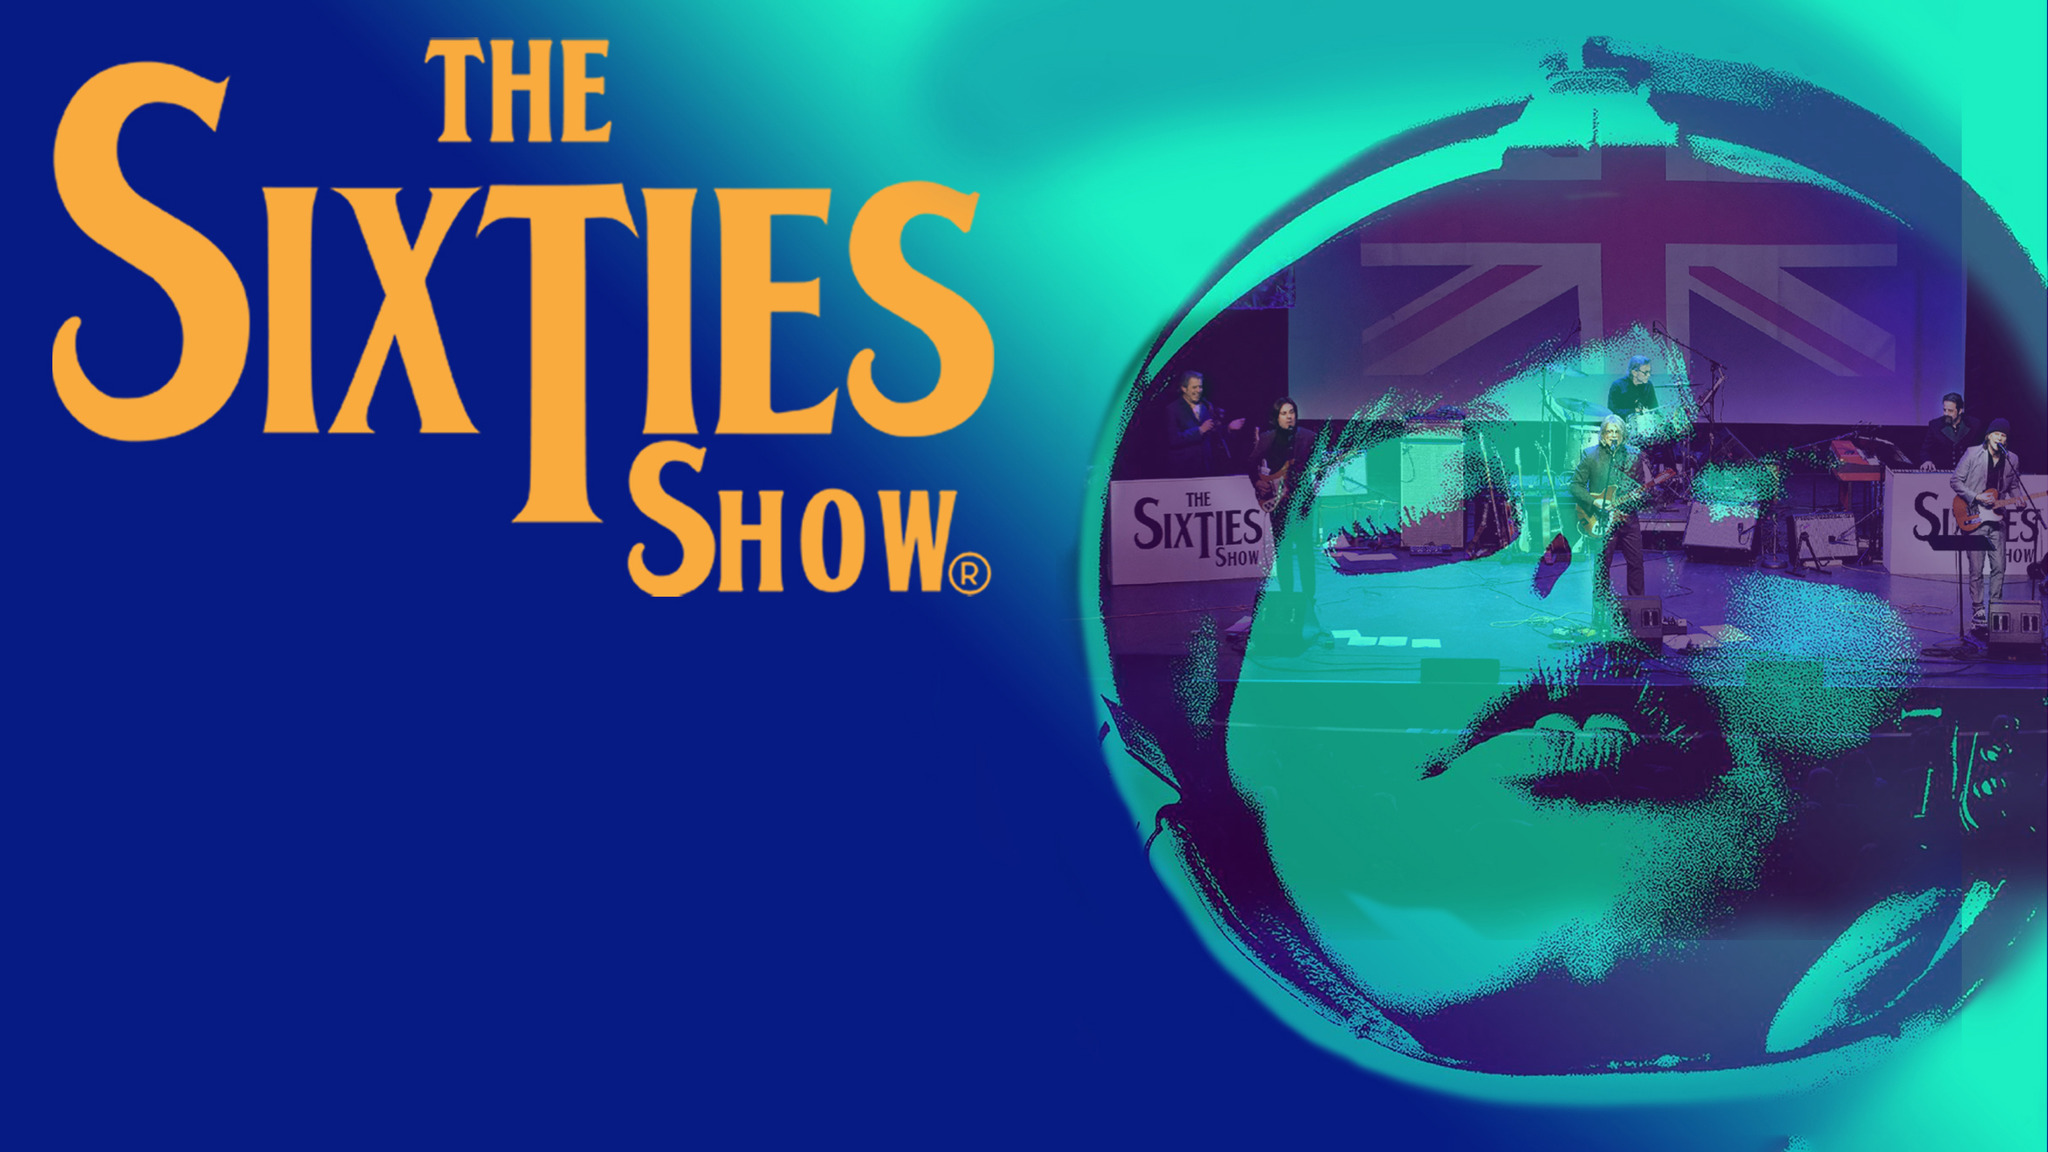 The Sixties Show-The Greatest 1960's Musical Re-Creation Show on Earth